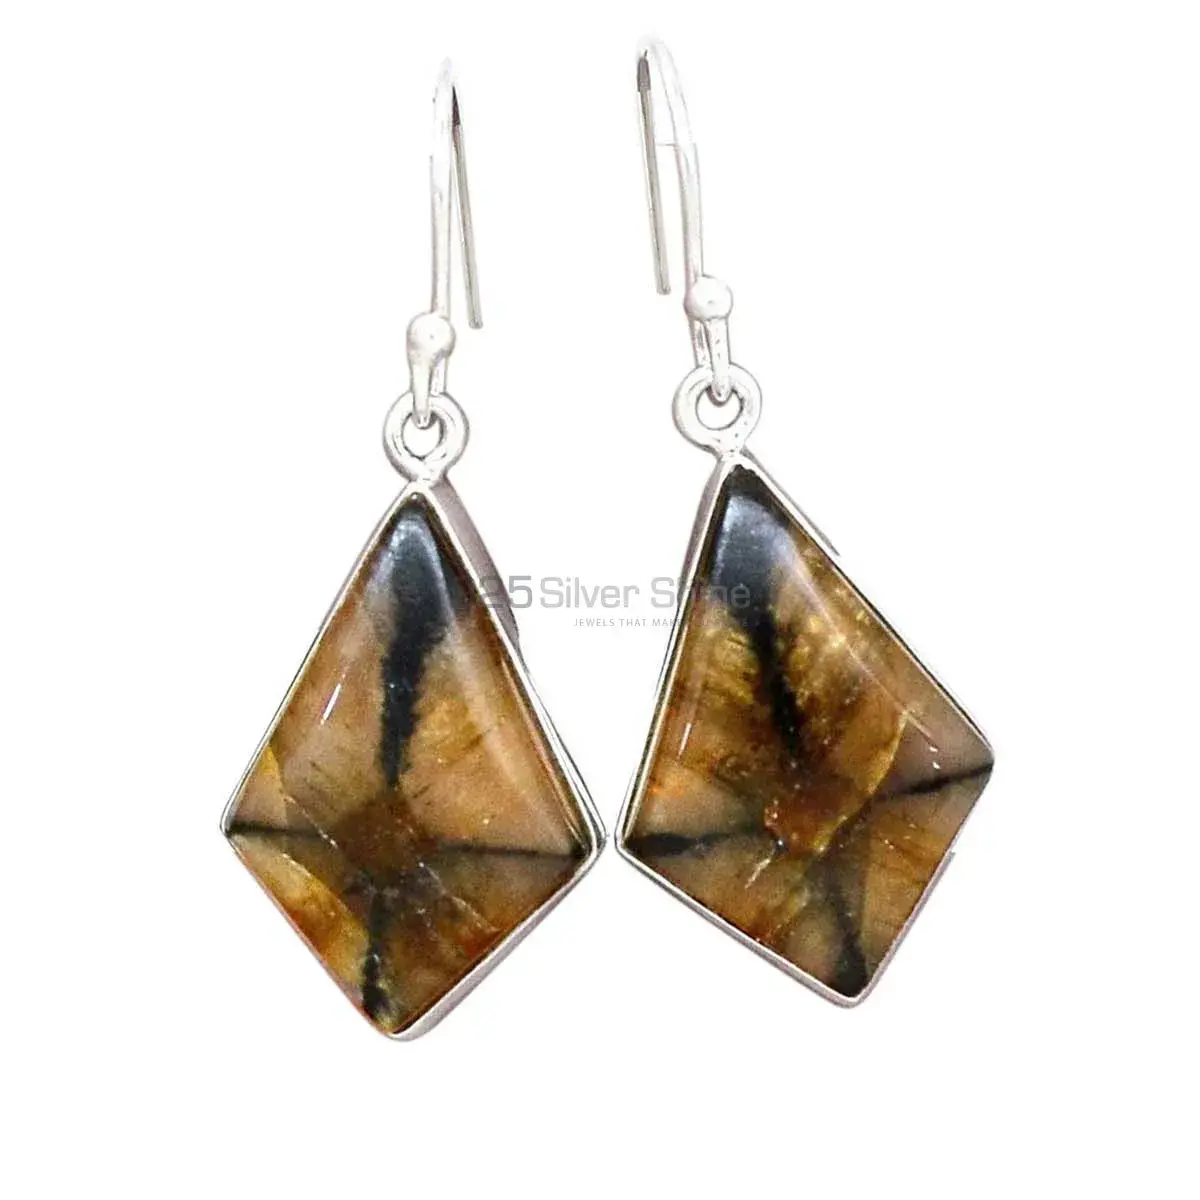 Affordable 925 Sterling Silver Handmade Earrings Manufacturer In Chiastolite Gemstone Jewelry 925SE2748